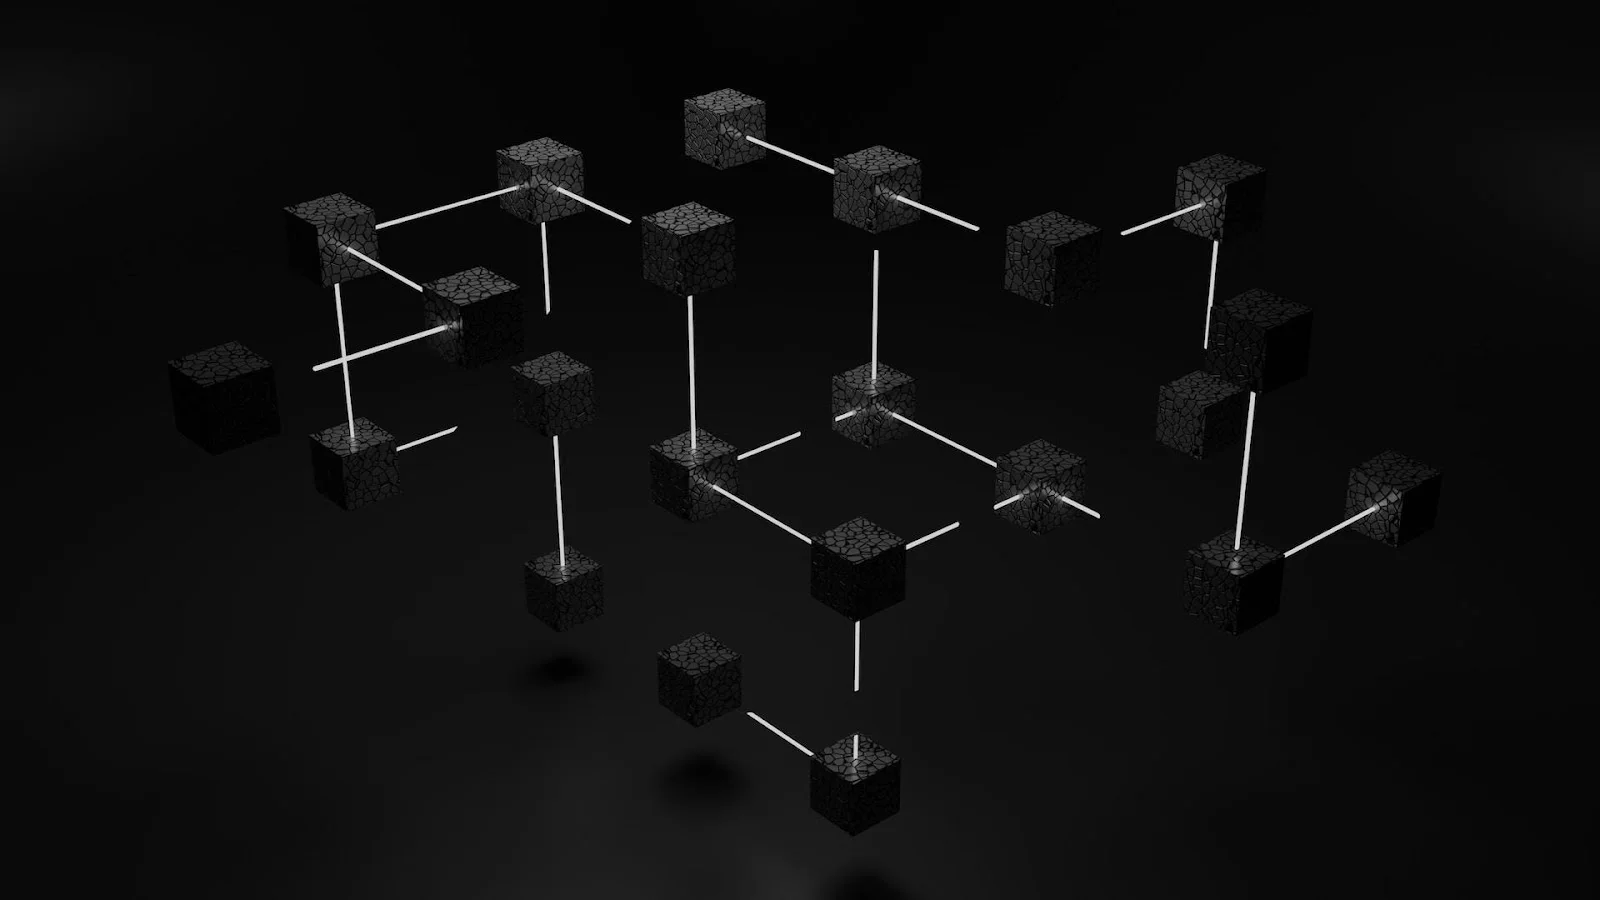 A chain of black blocks arranged in 3D space